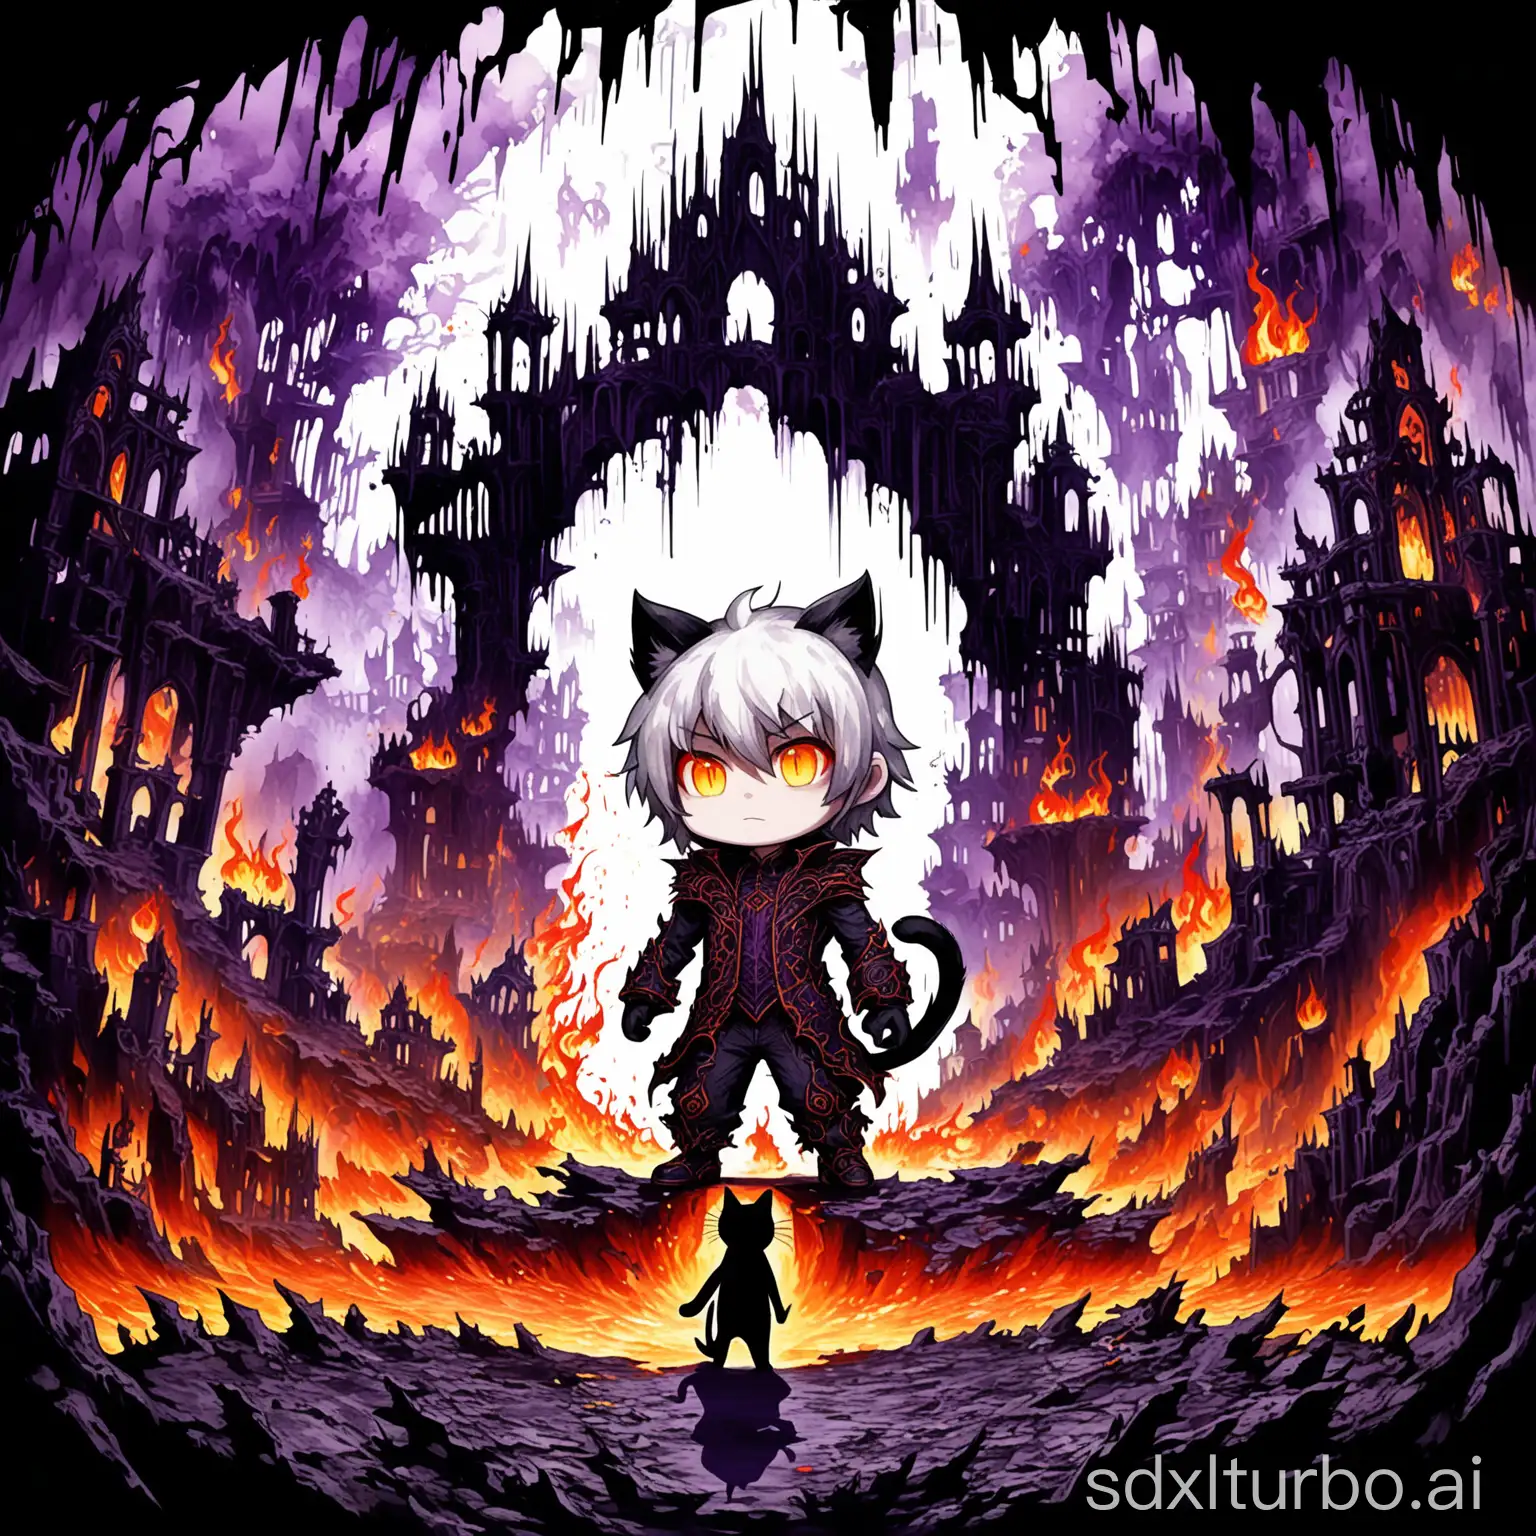 Chibi-Boy-with-Cat-Ears-in-Purple-Dungeon-with-Explosive-Animations